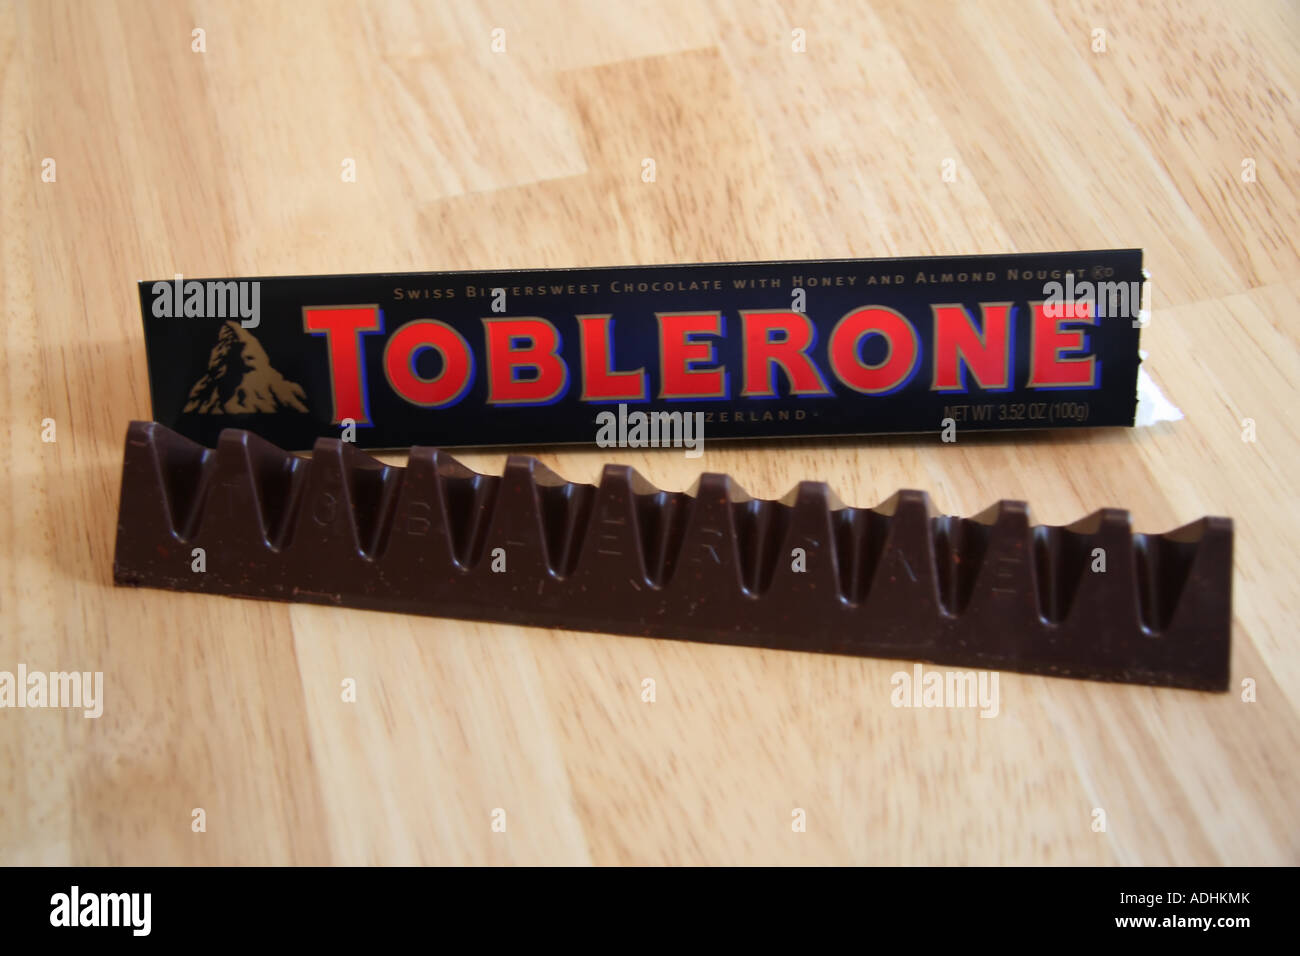 A swiss import, here in the United States, Toblerone chocolate candy bar. Stock Photo